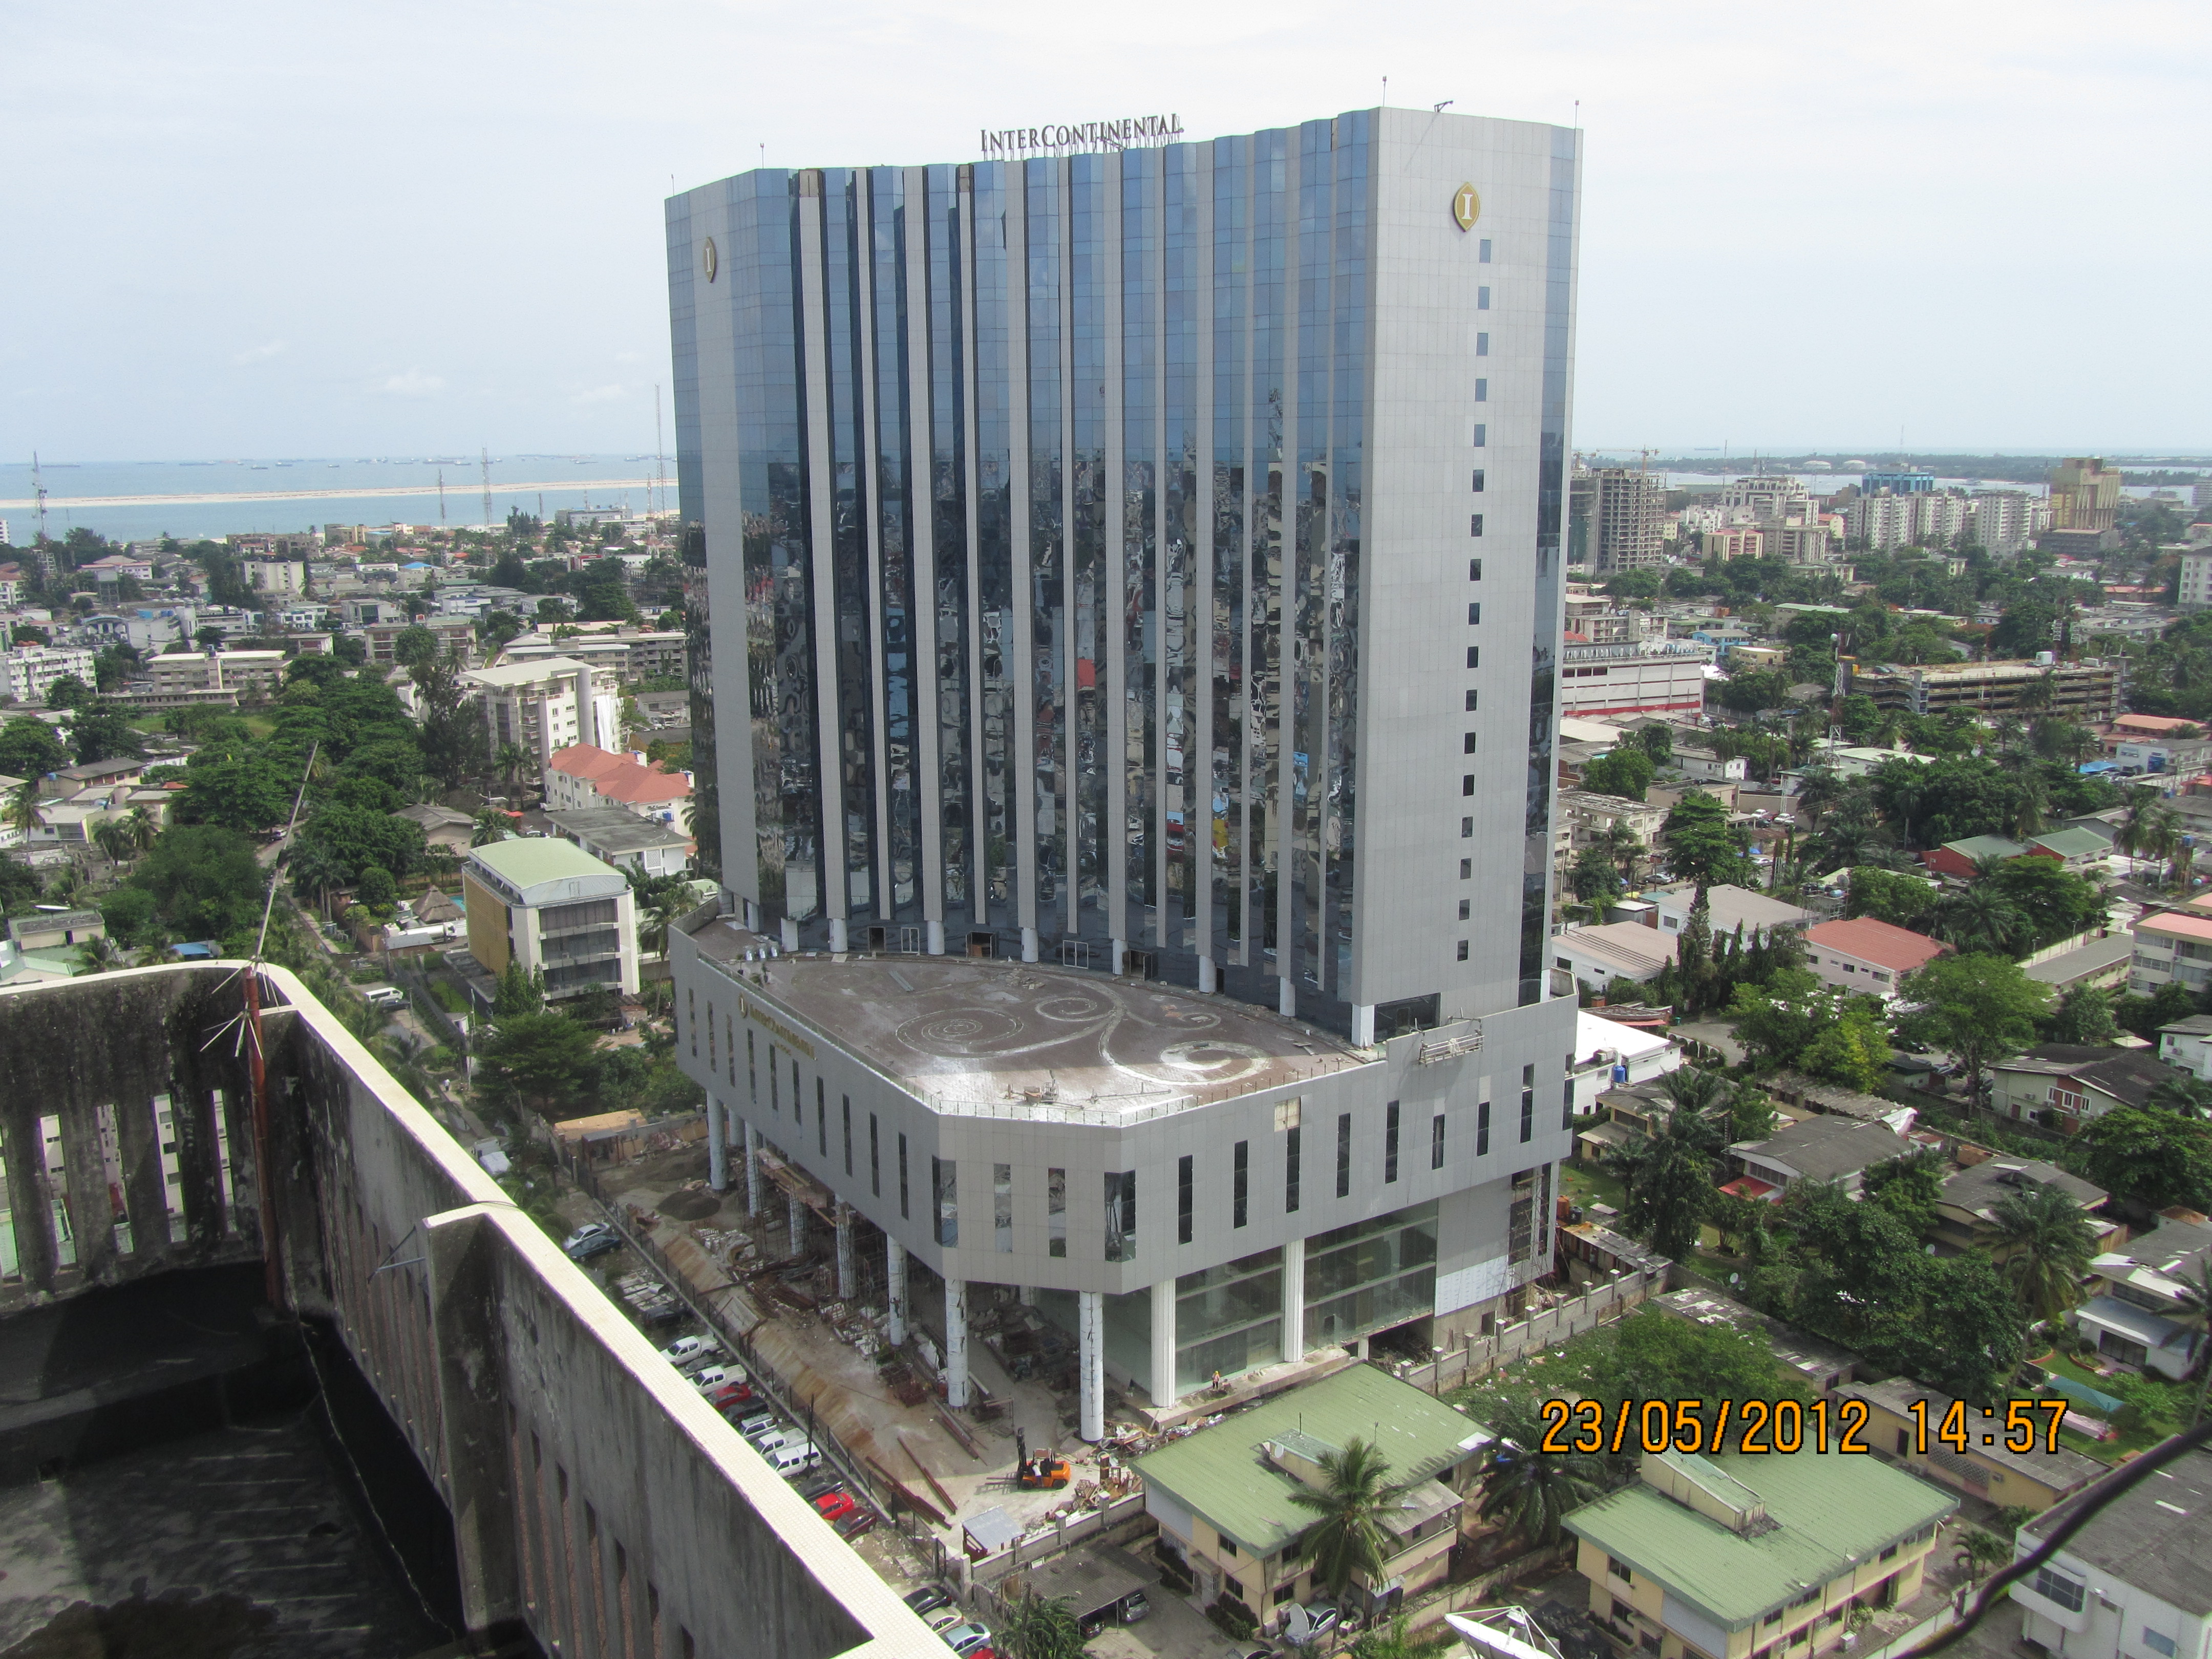 24-Storey building on Kofo 
Abayomi for Milan 
Intercontinental Hotel Limited,
Lagos